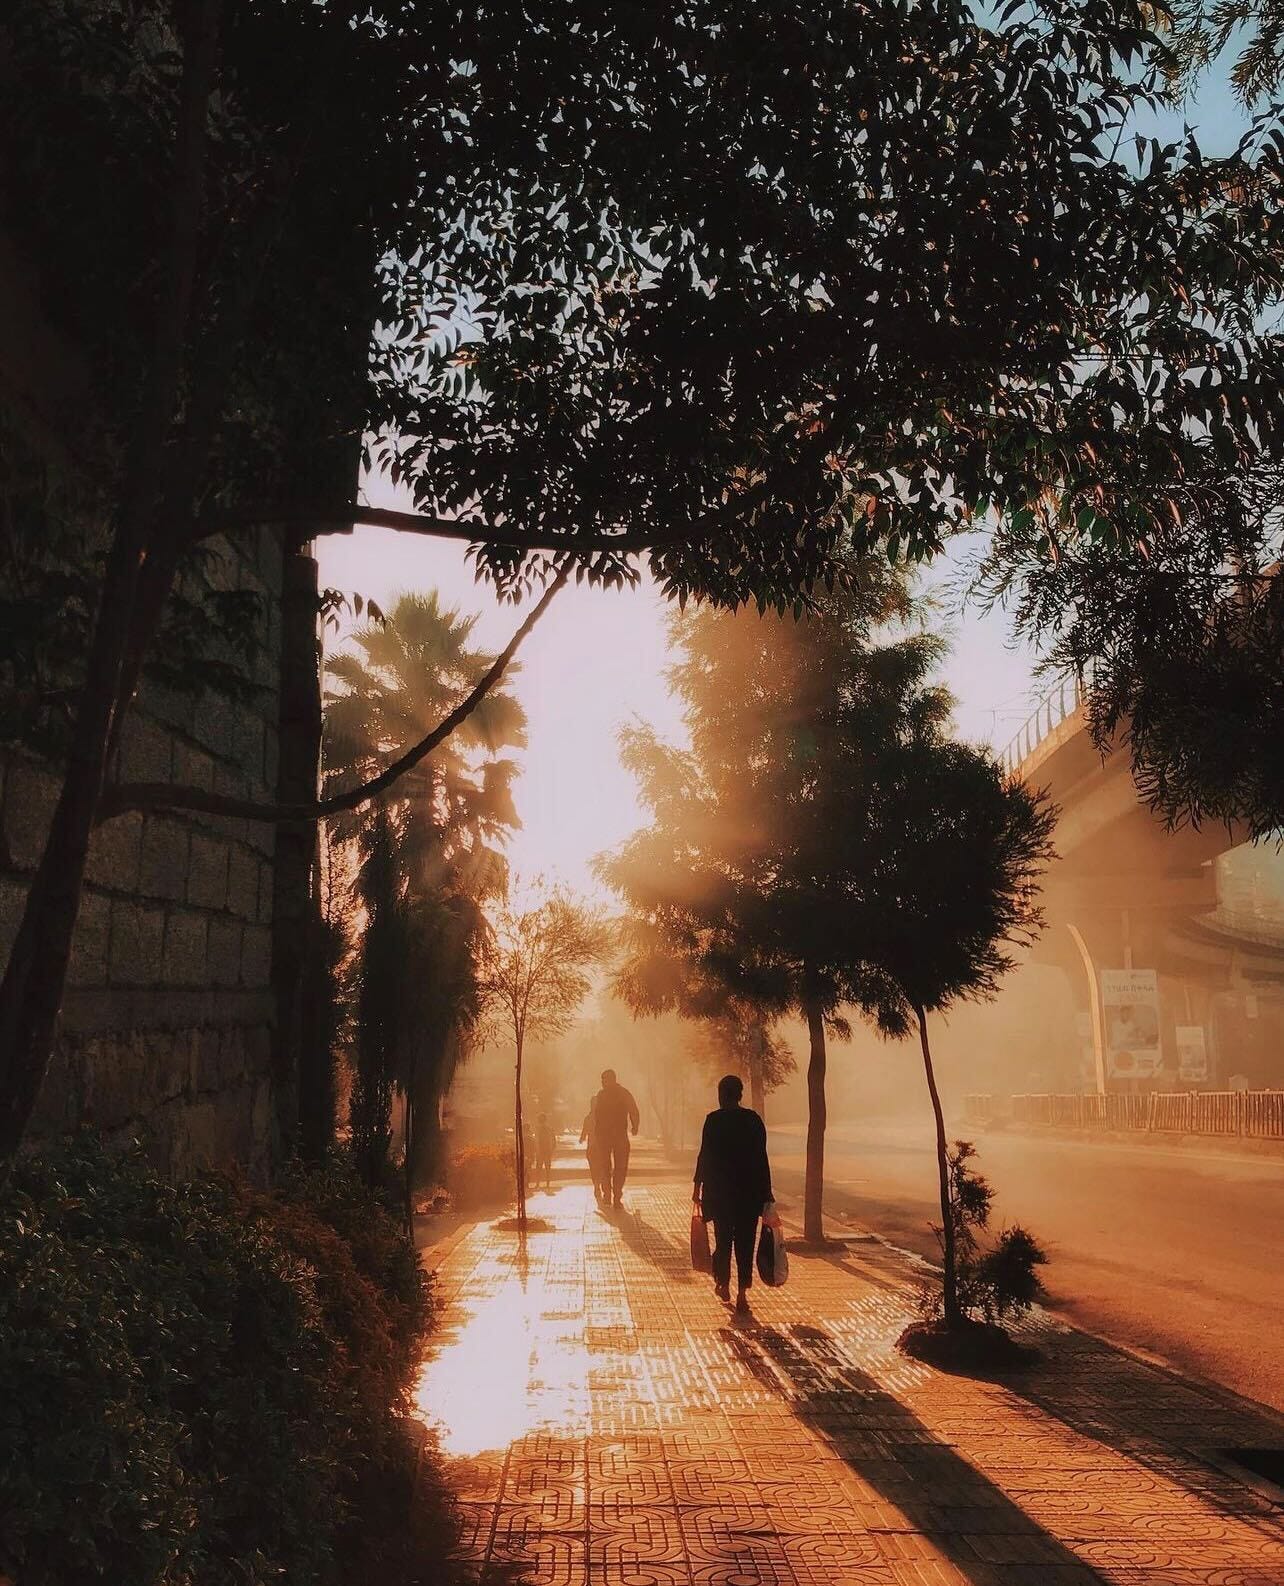 People walking down a tree-lined street in Addis, backlit by the morning sun